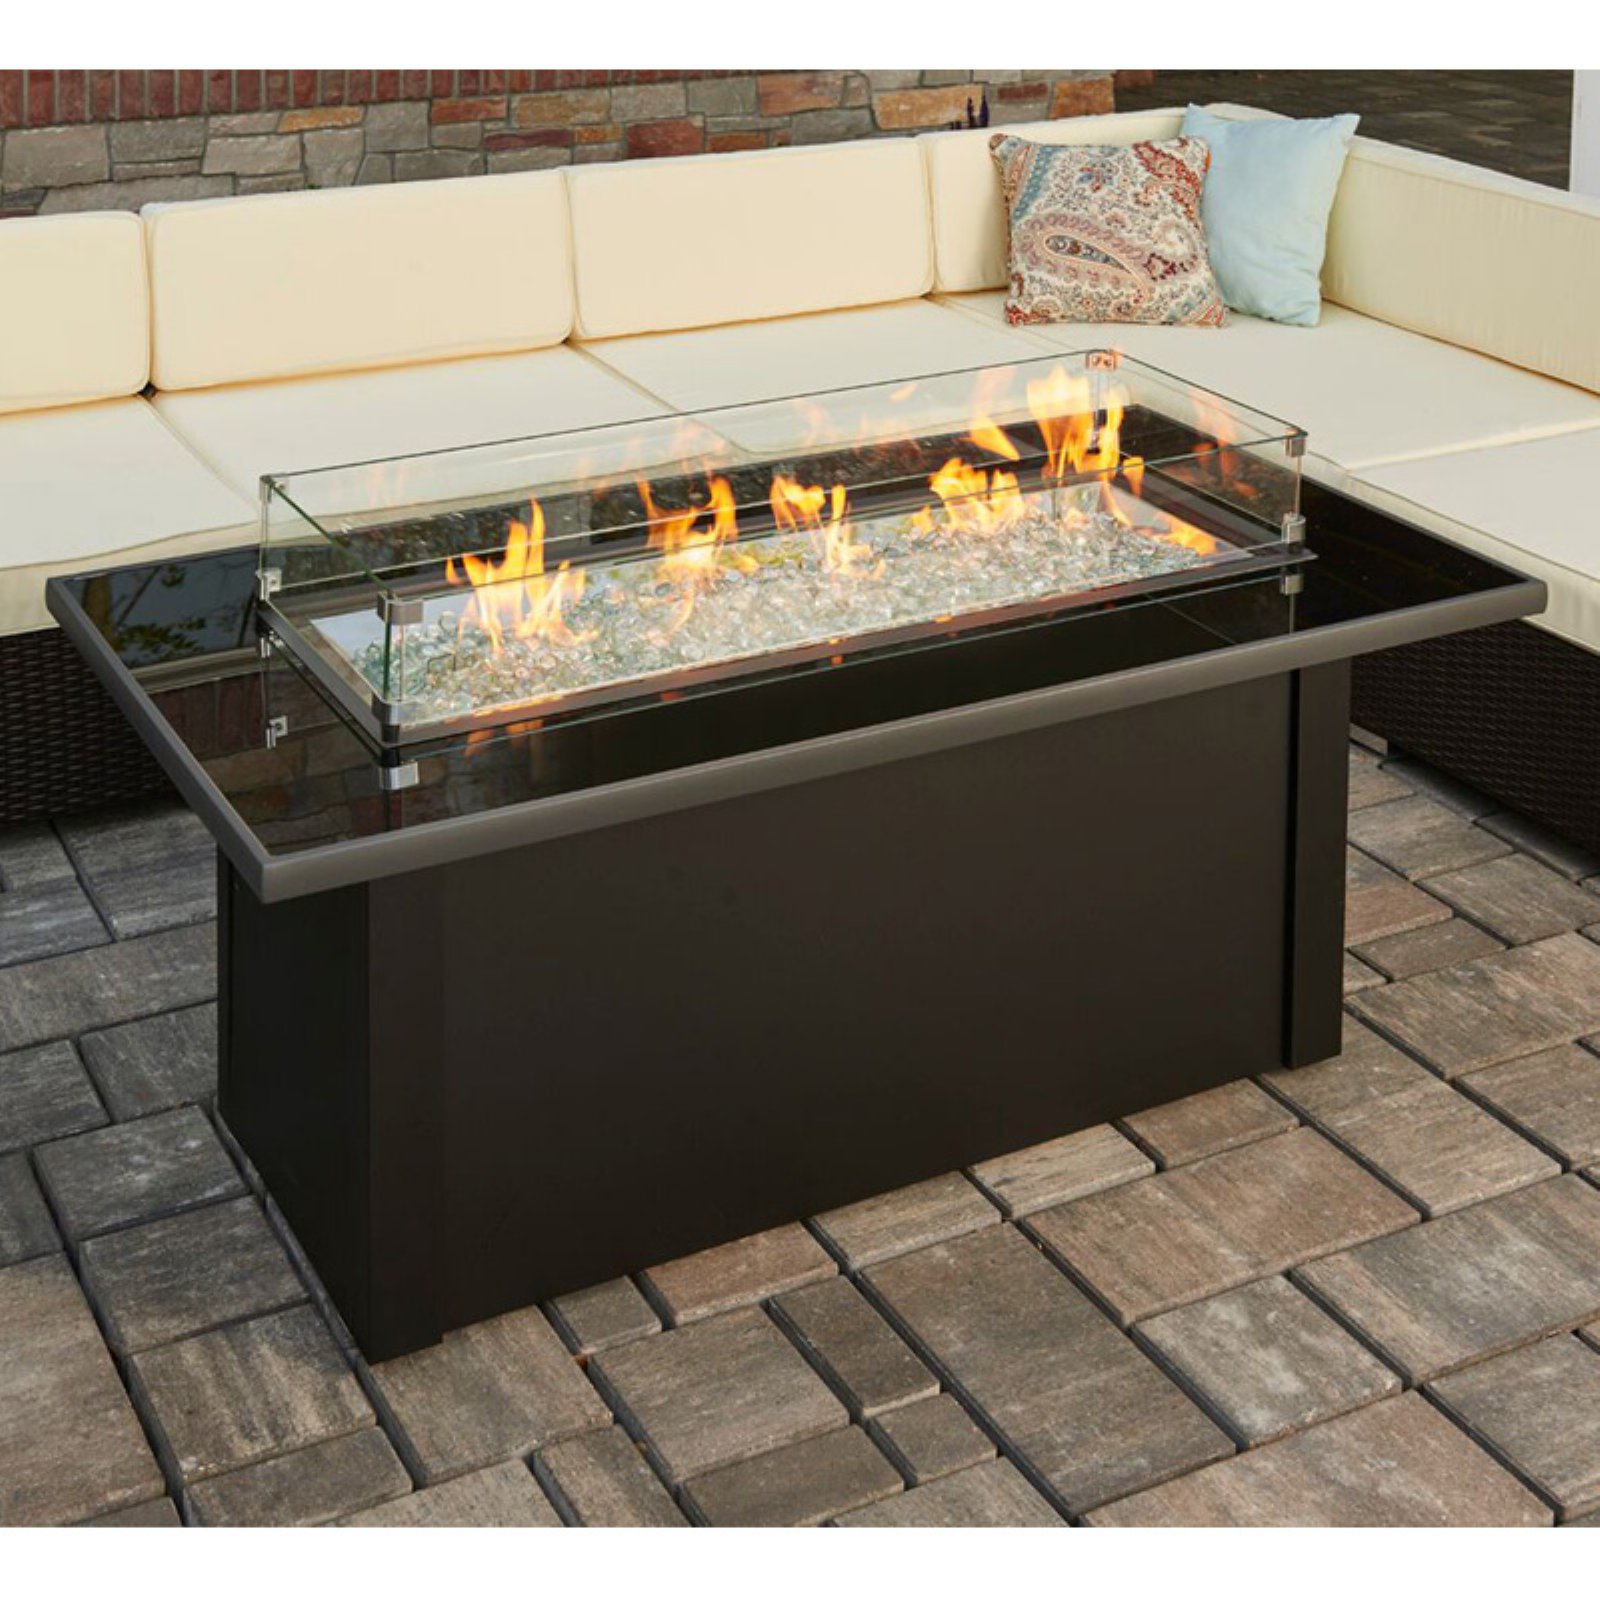 Propane Tank for Gas Fireplace New Outdoor Greatroom Monte Carlo 59 3 In Fire Table with Free Cover